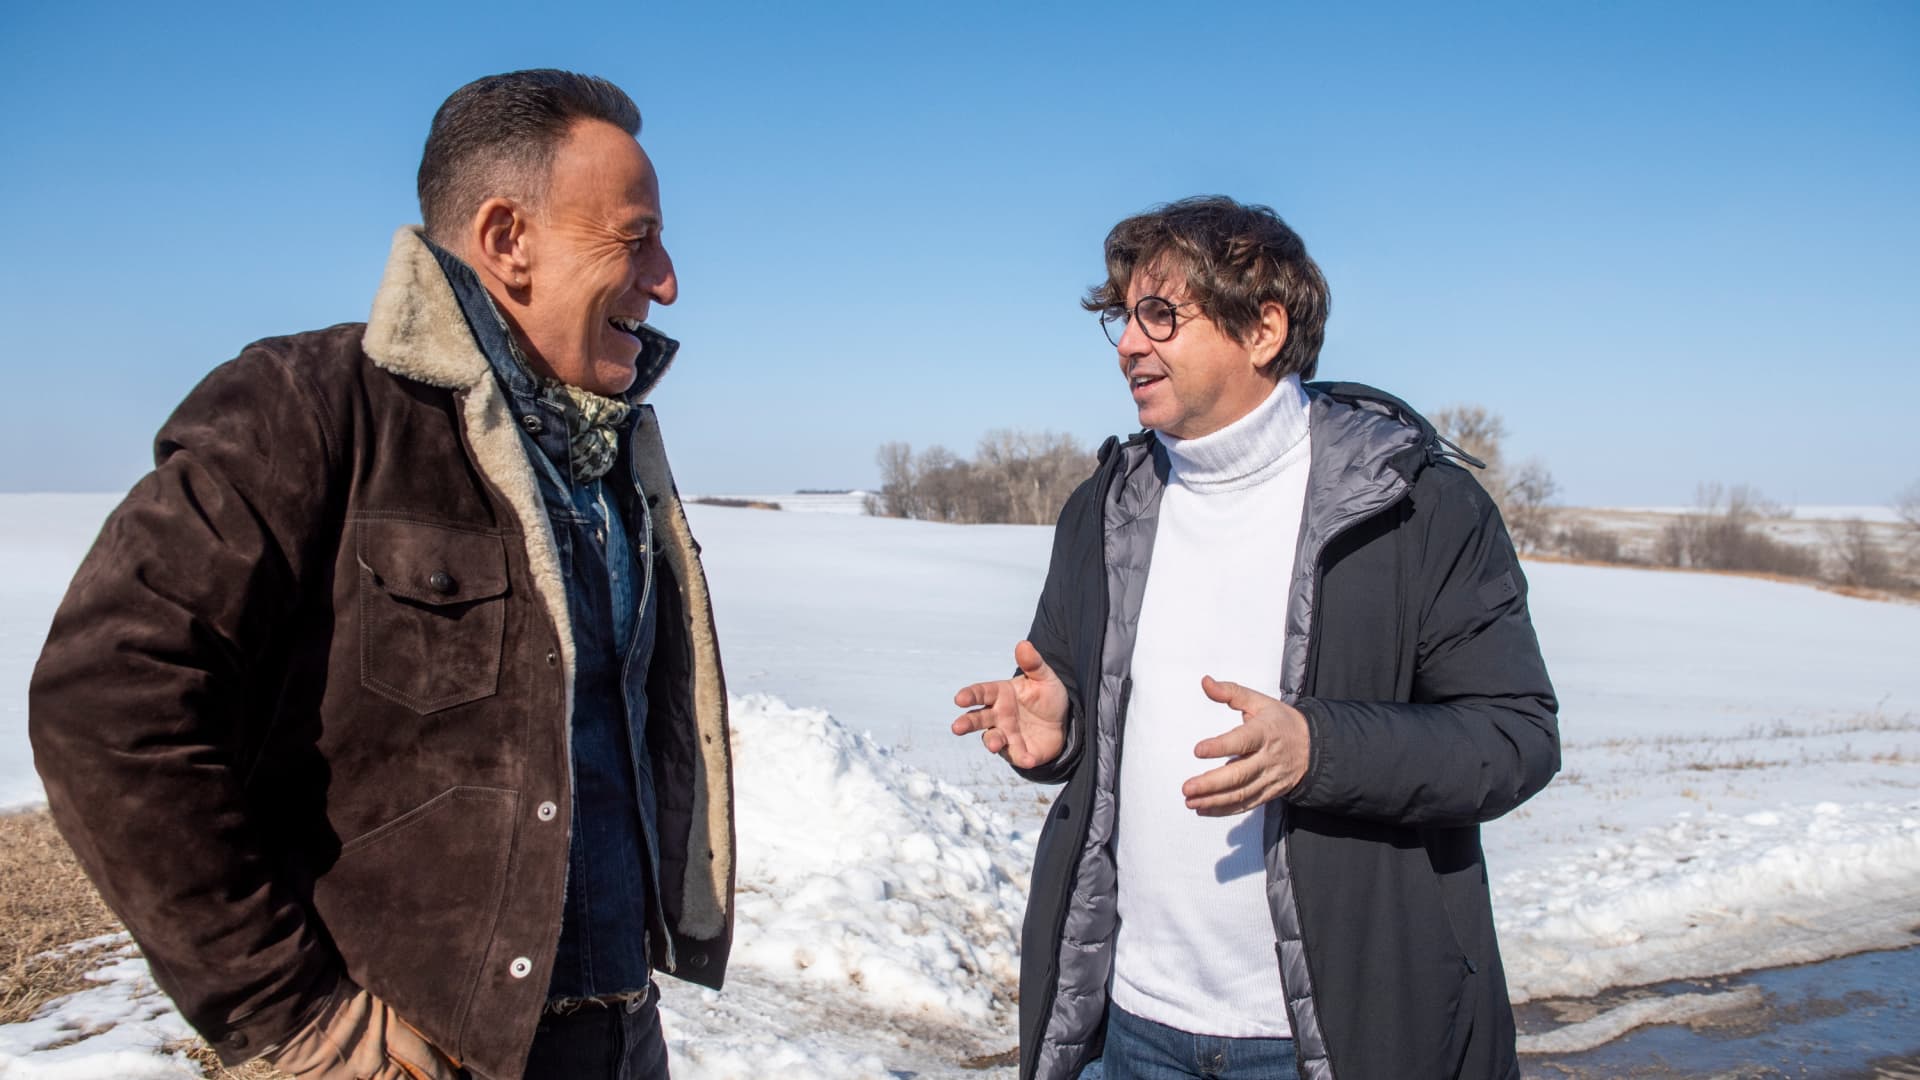 Bruce Springsteen (left) with Olivier Francois, chief marketing officer of Stellantis, during filming of the company's Super Bowl LV ad for Jeep.